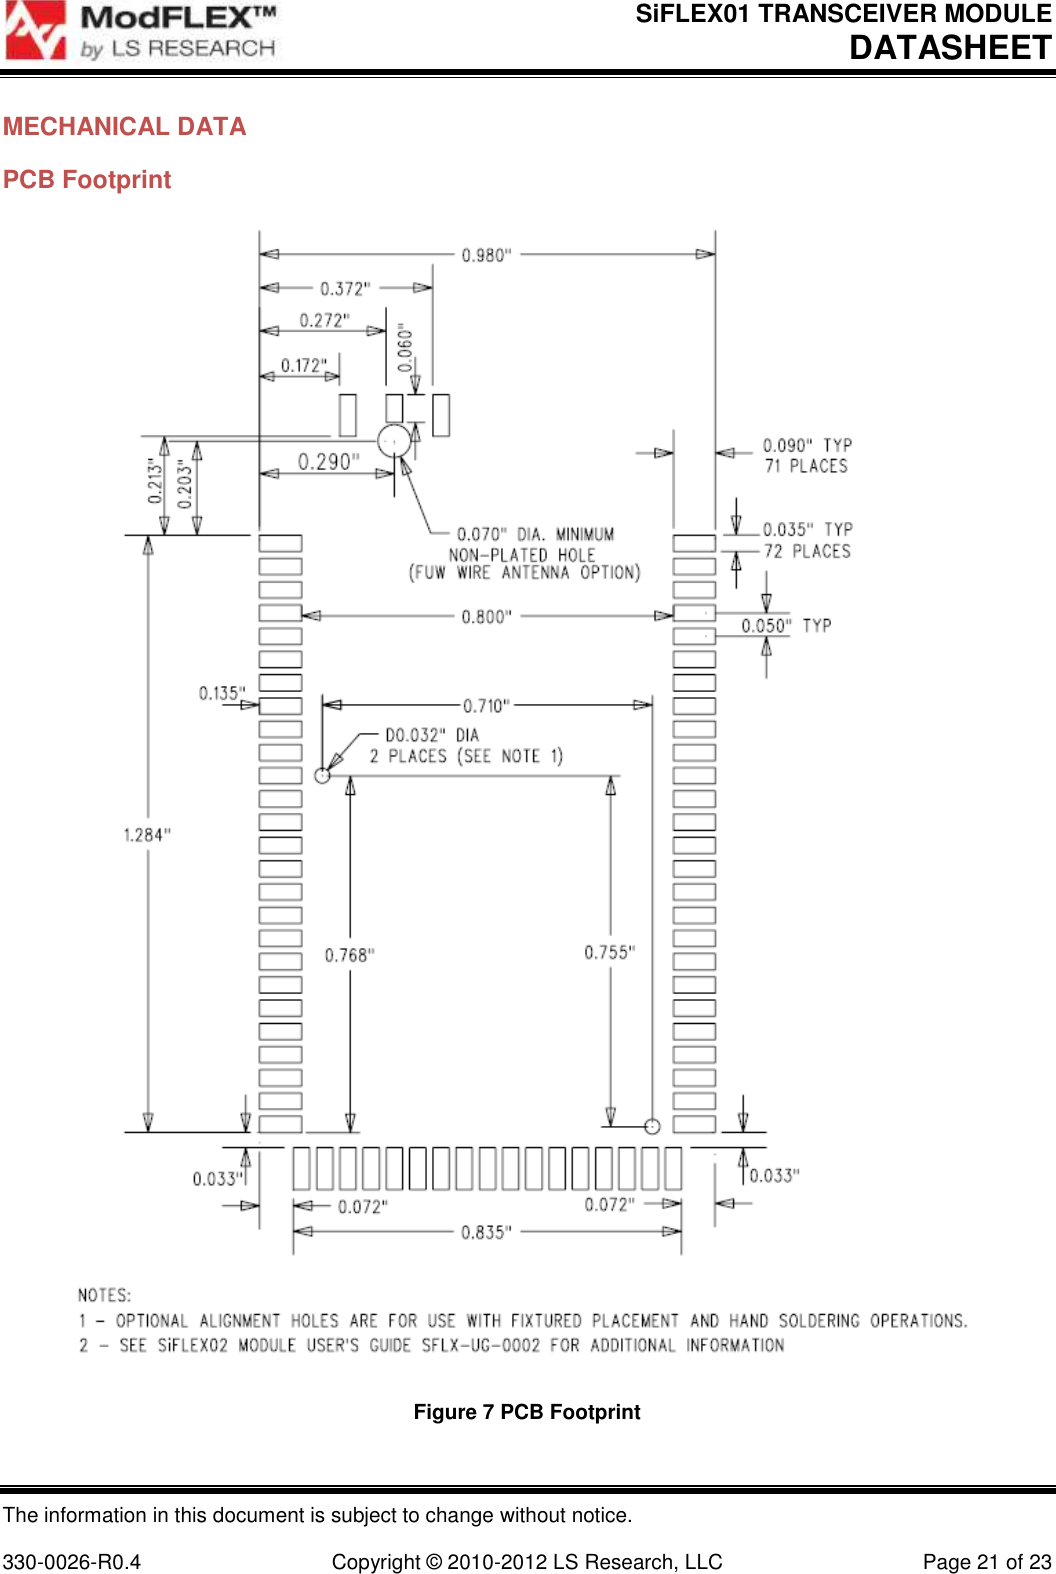 SiFLEX01 TRANSCEIVER MODULE DATASHEET The information in this document is subject to change without notice.  330-0026-R0.4  Copyright © 2010-2012 LS Research, LLC  Page 21 of 23 MECHANICAL DATA PCB Footprint  Figure 7 PCB Footprint 